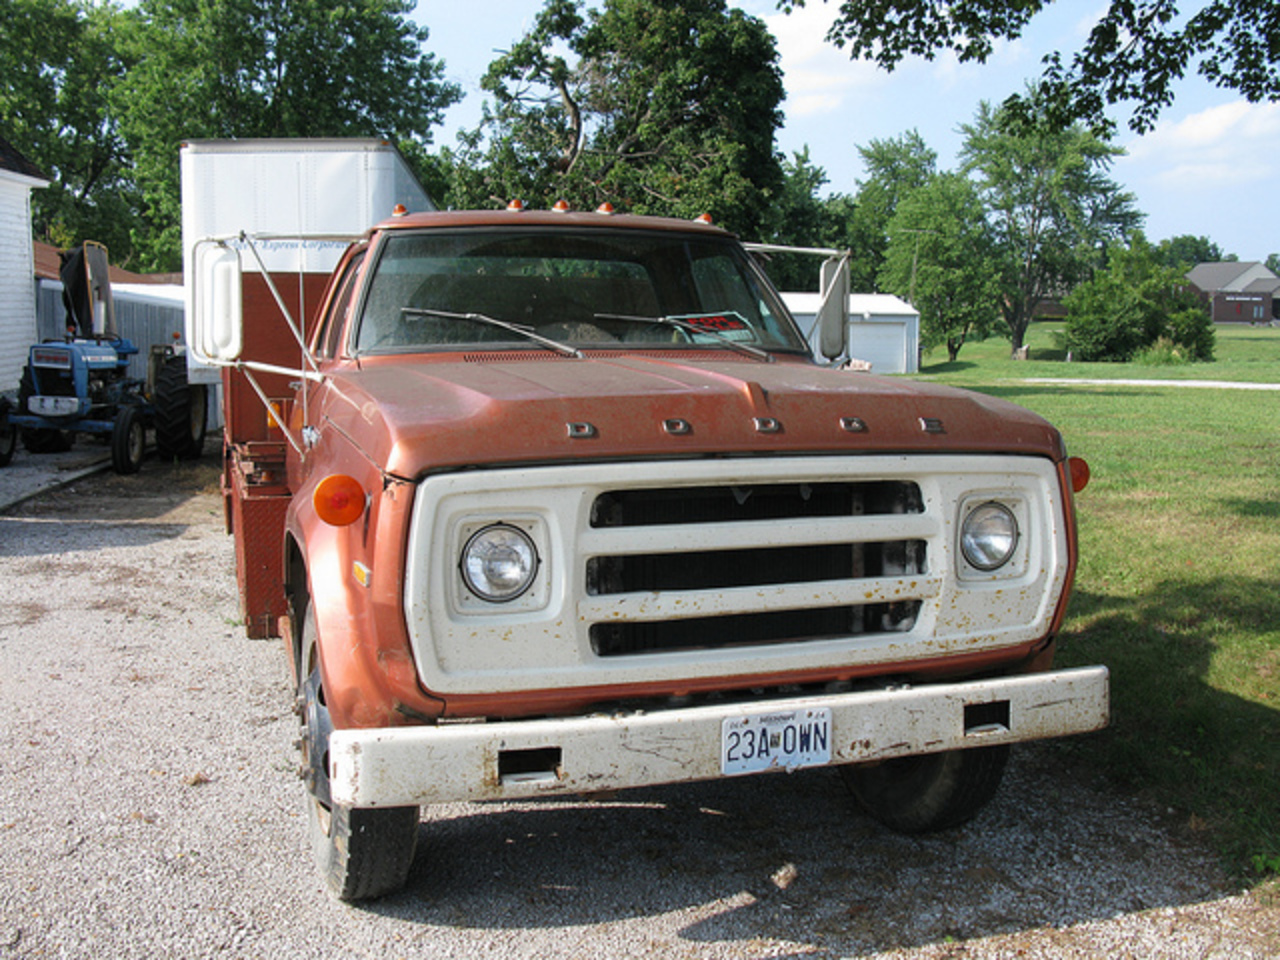 Flickr: The Old Dodge Truck's Pool